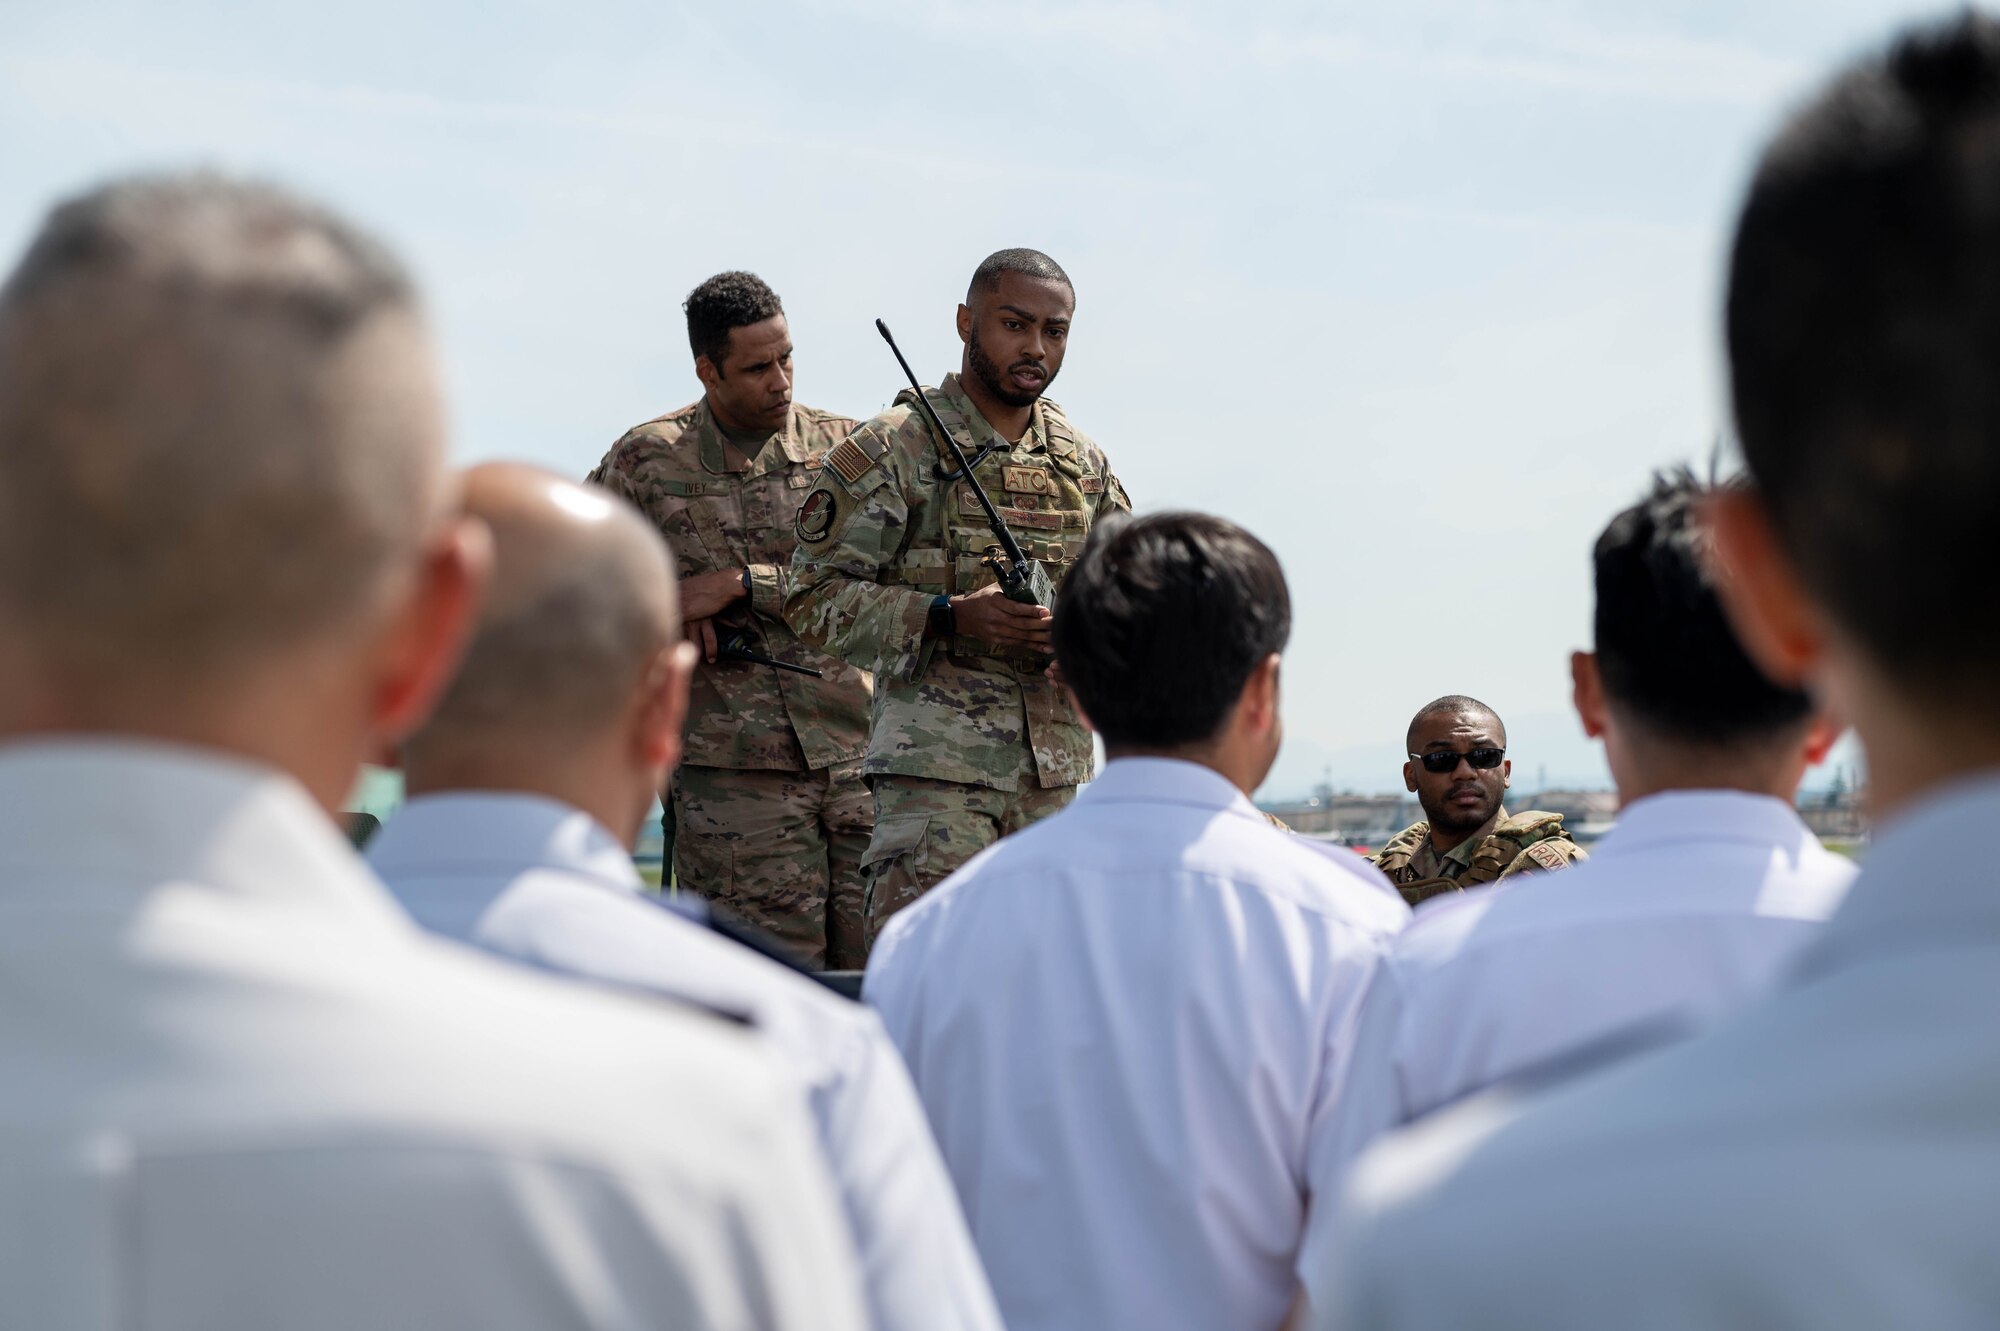 A service member speaks to attendees of the 2023 Senior Enlisted Leader Symposium at Yokota Air Base, Japan.